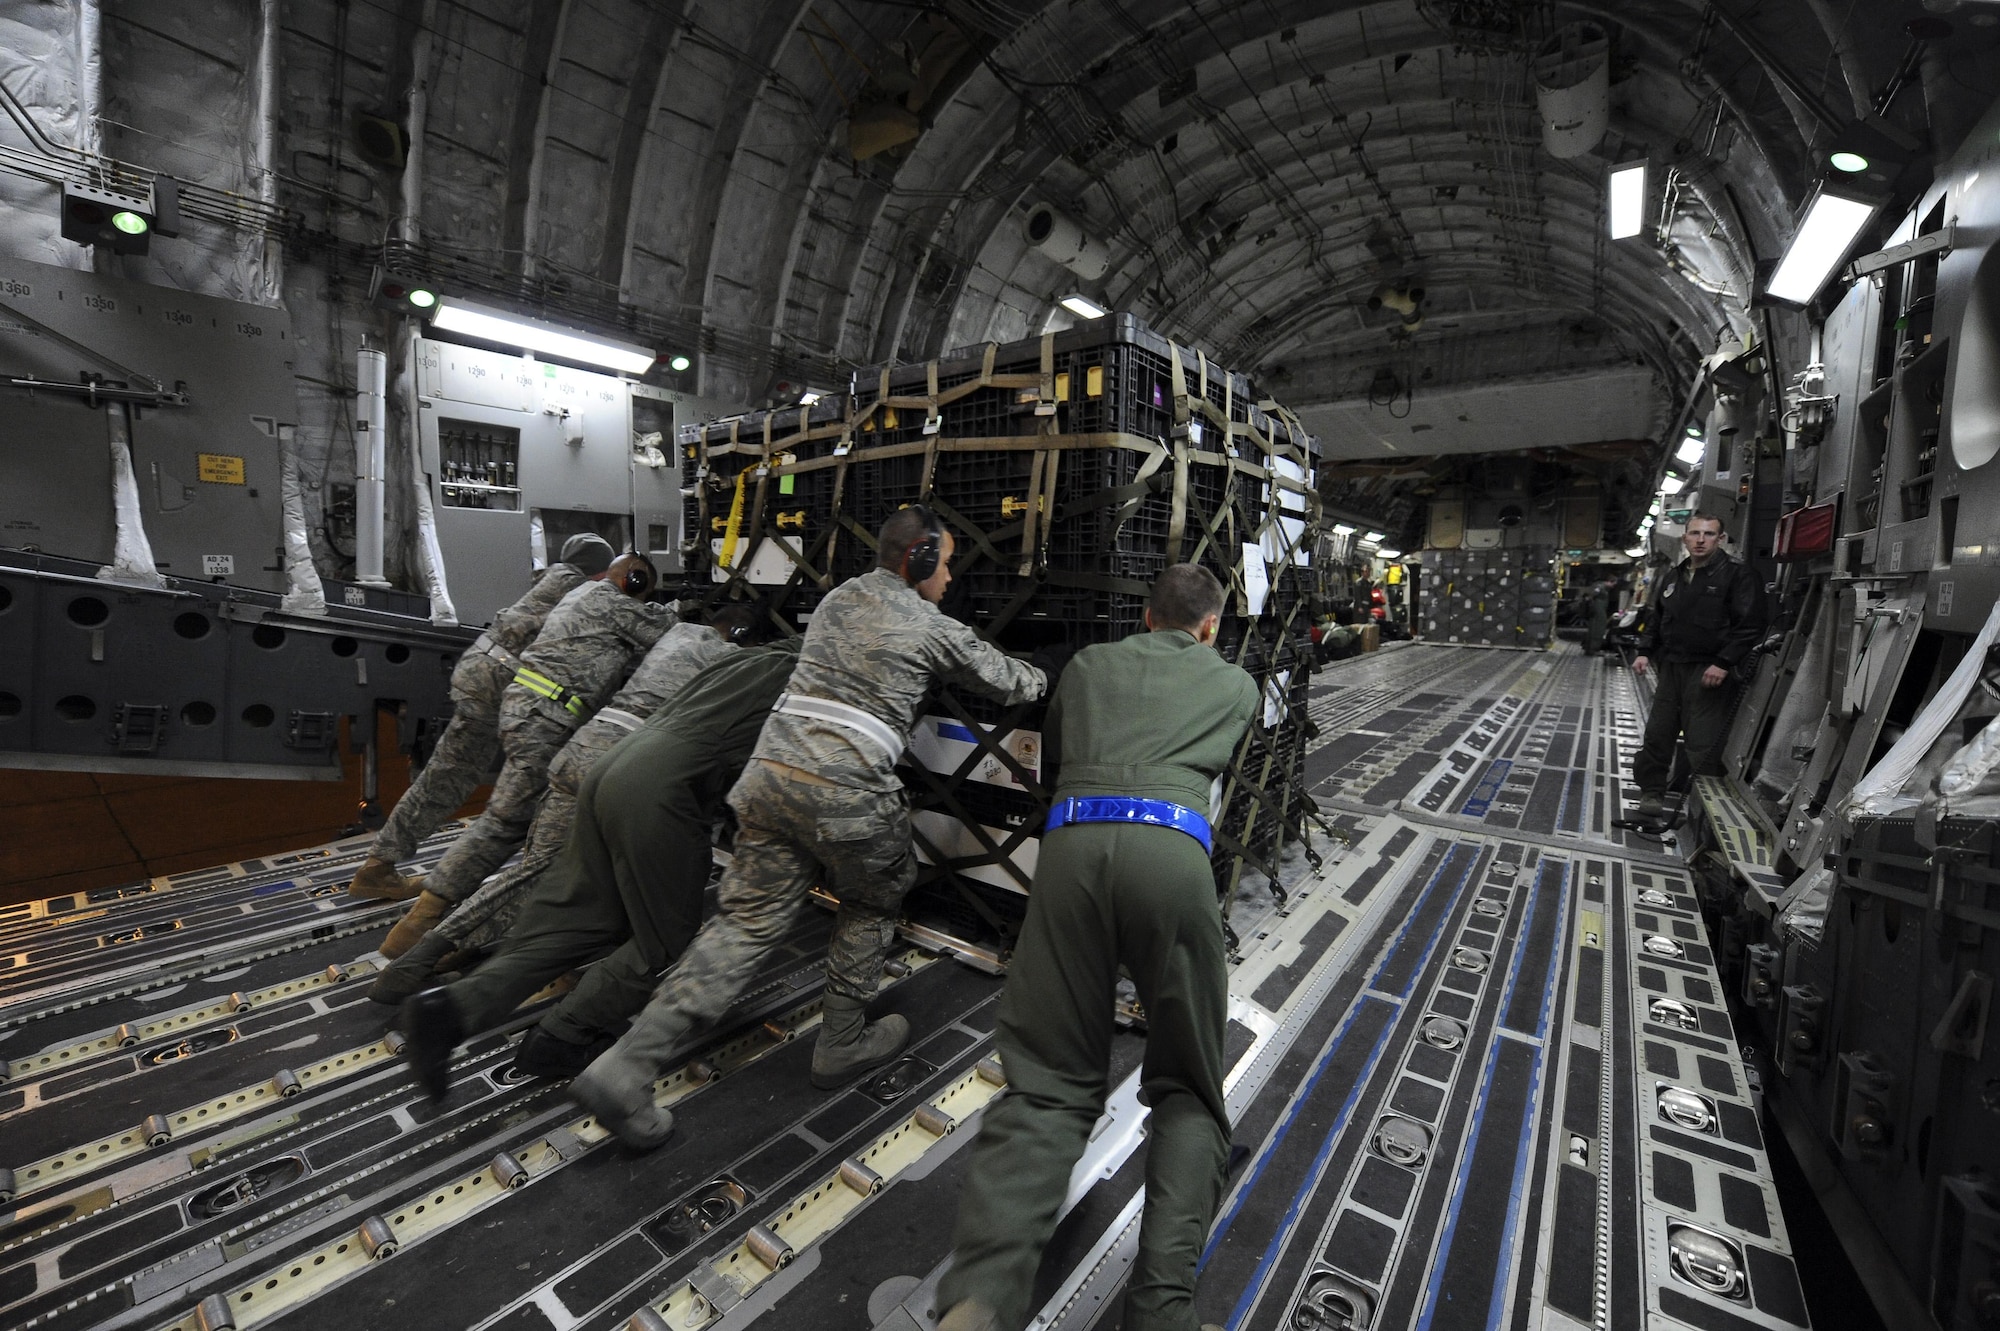 U.S. Air Force members load a pallet onto a U.S. Air Force C-17A Globe Master III, March 12, March Air Reserve Base, Calif. The supplies are in route to Japan for earthquake relief efforts. (U.S. Air Force photo by Staff Sgt. Matthew Smith/Released)